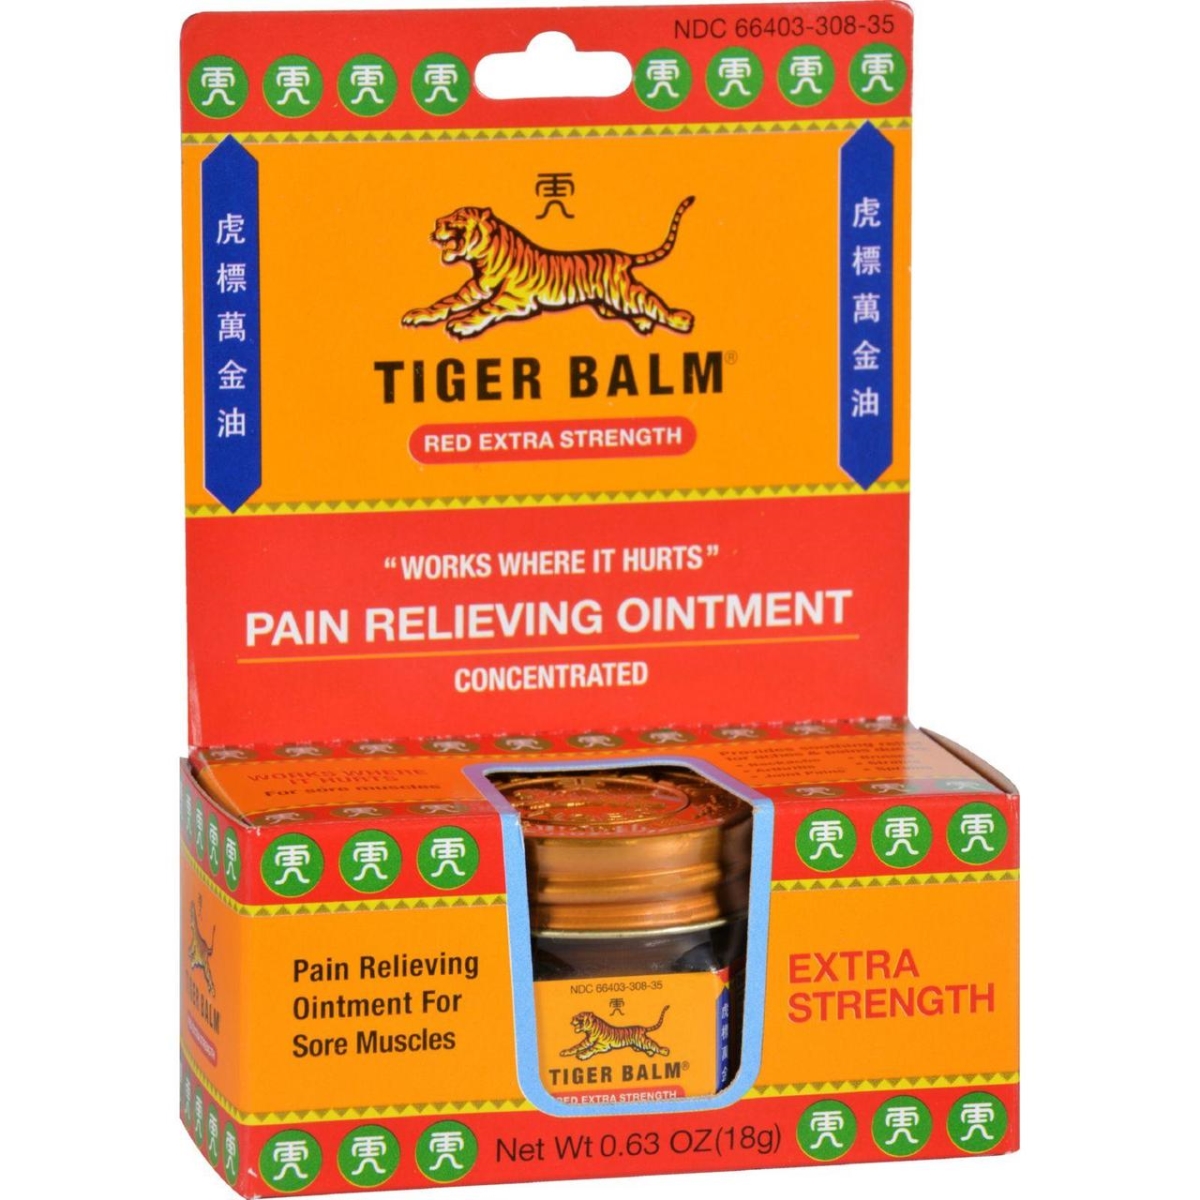 Hg0926568 0.63 Oz Pain Relieving Ointment, Extra Strength